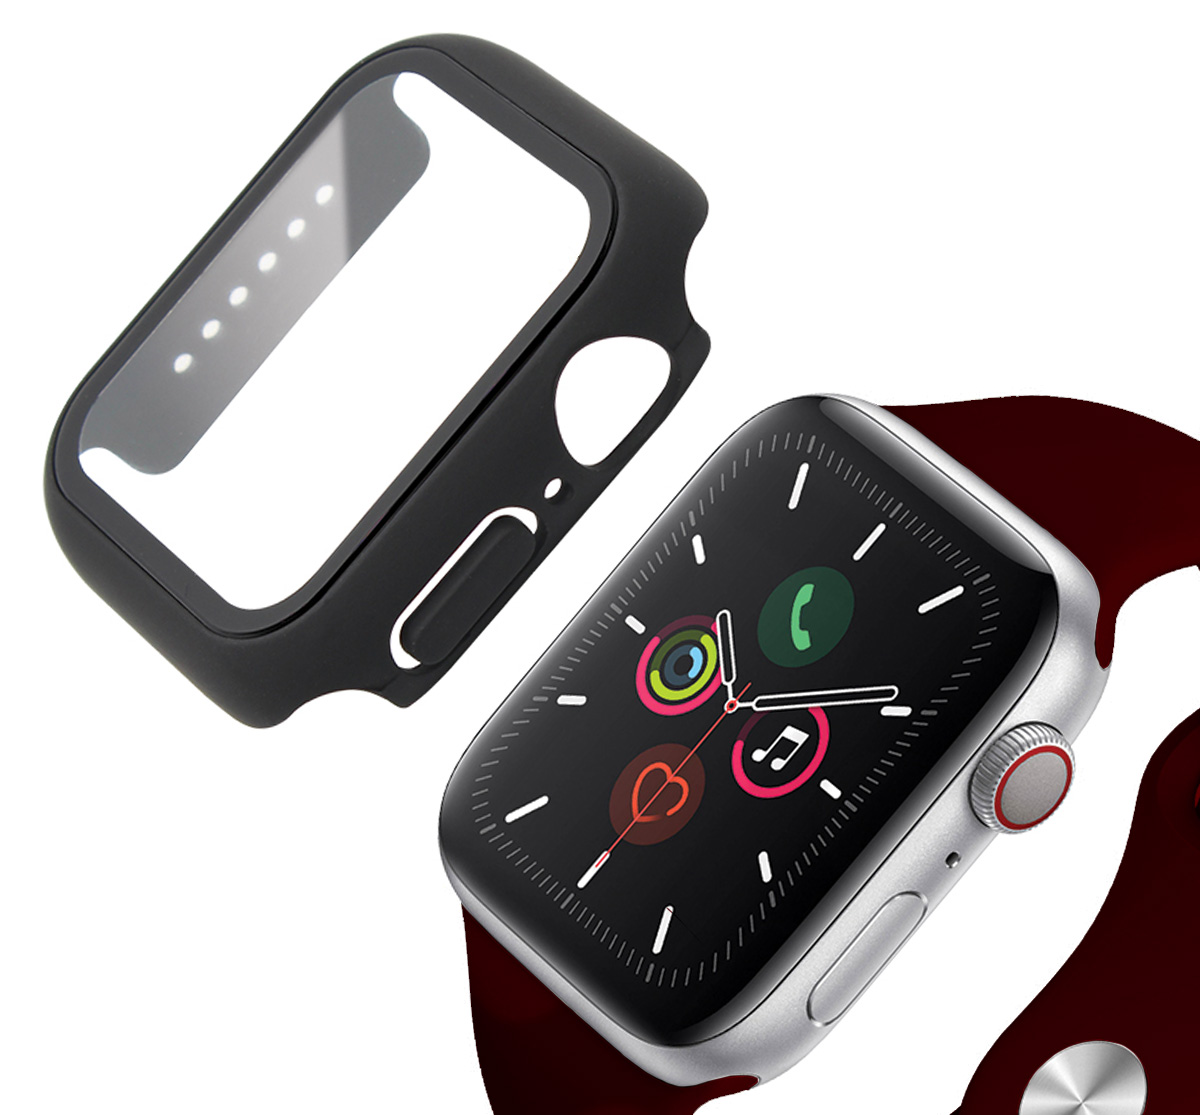 Full coverage tempered glass bumper with Black Edges for Apple Watch Series 1,2,3 Large (42mm)